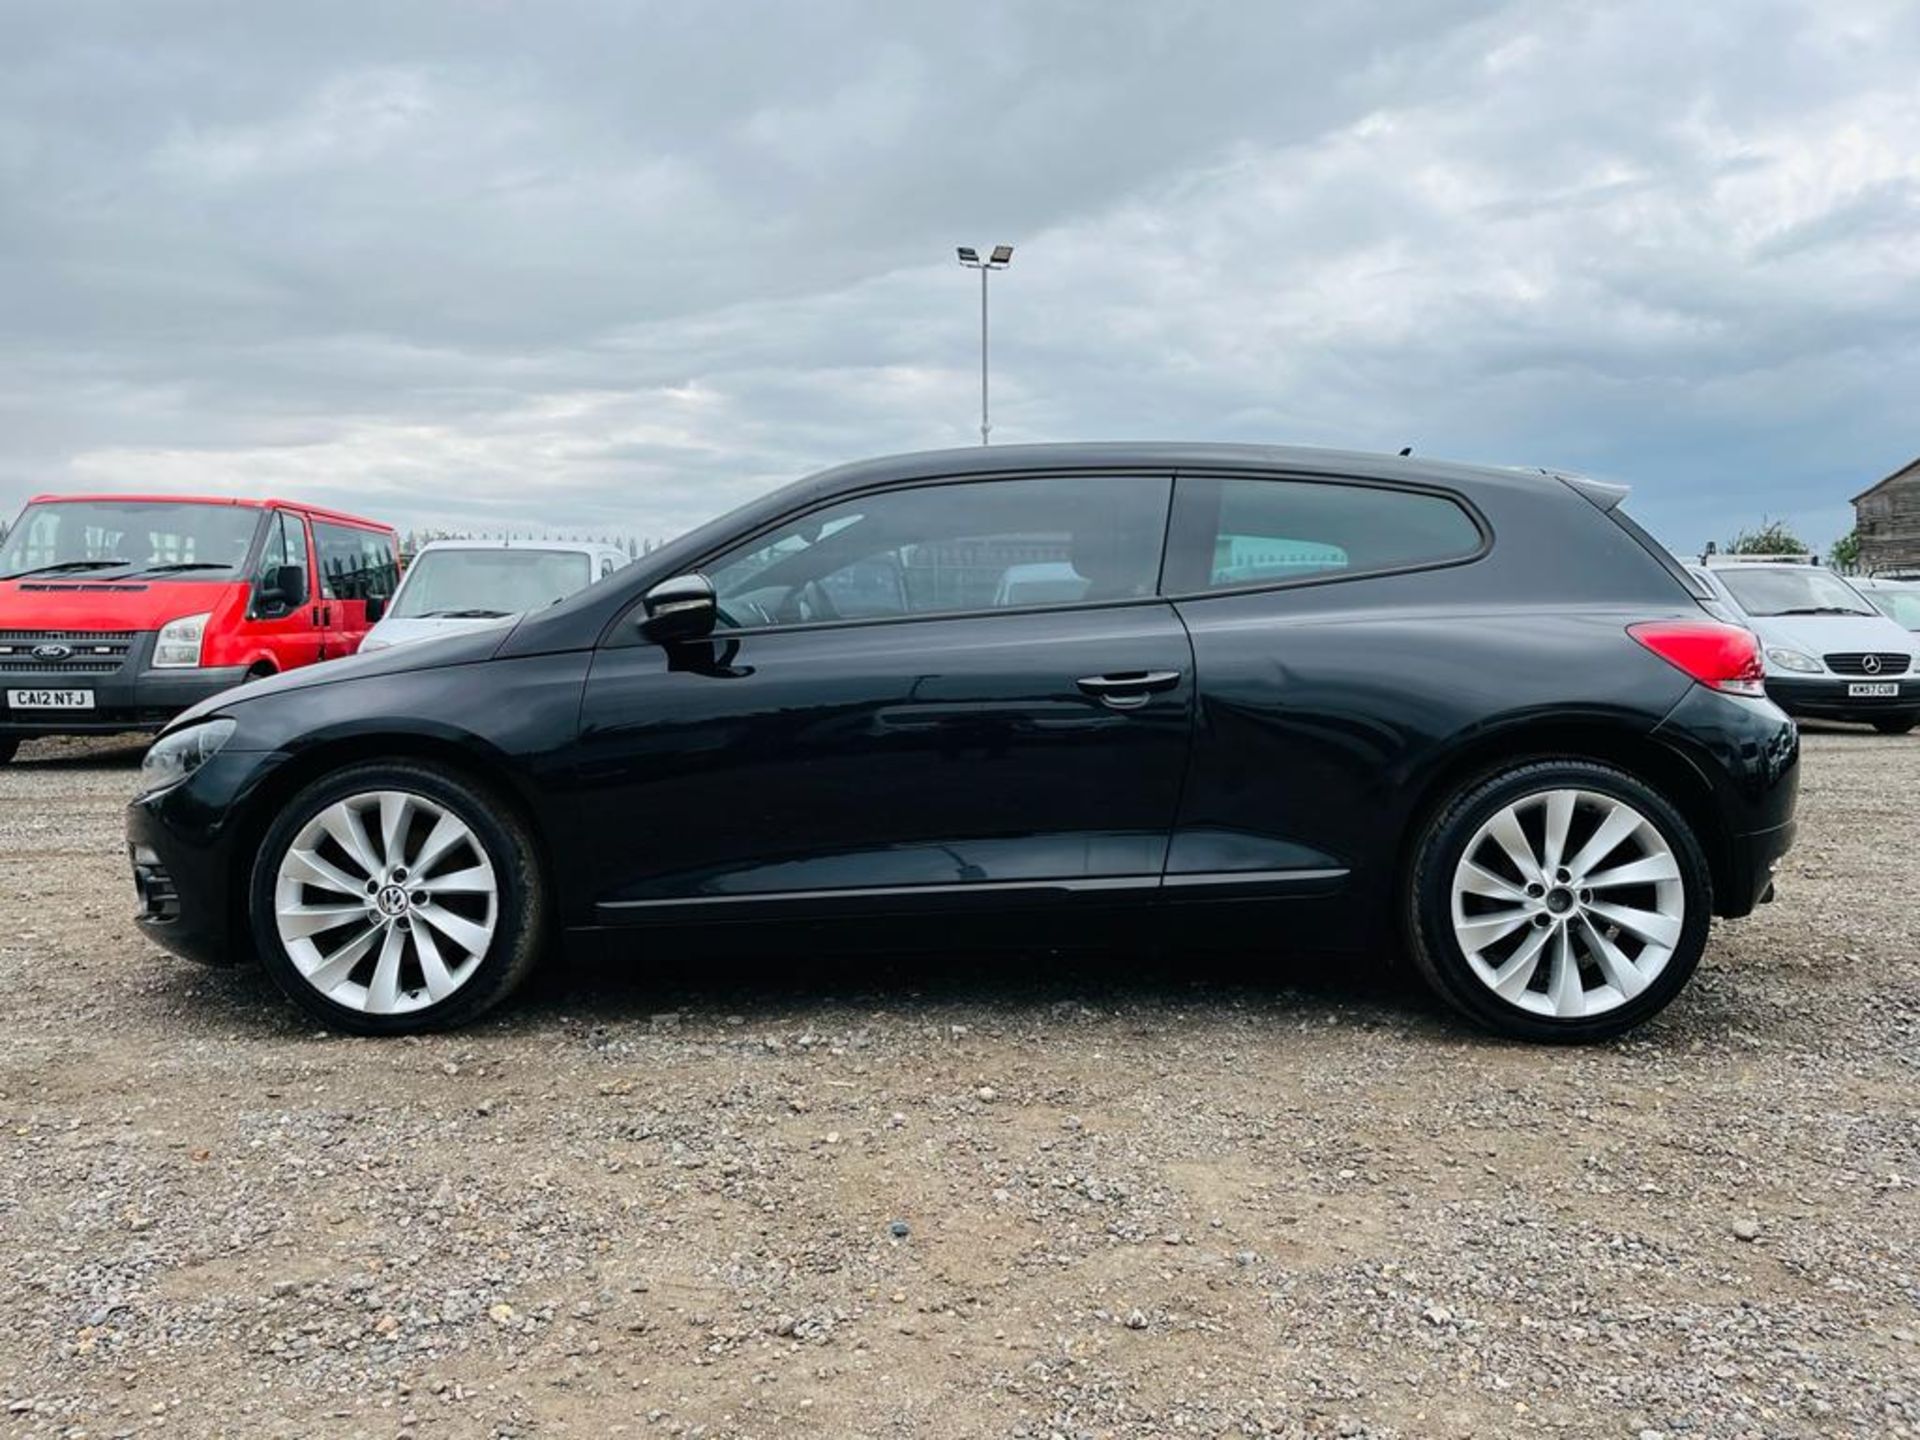 ** ON SALE ** Volkswagen Scirocco GT 2.0 TSI 210 Coupe 2010 '10 Reg' Sat Nav - A/C - Only 78719 - Image 9 of 25